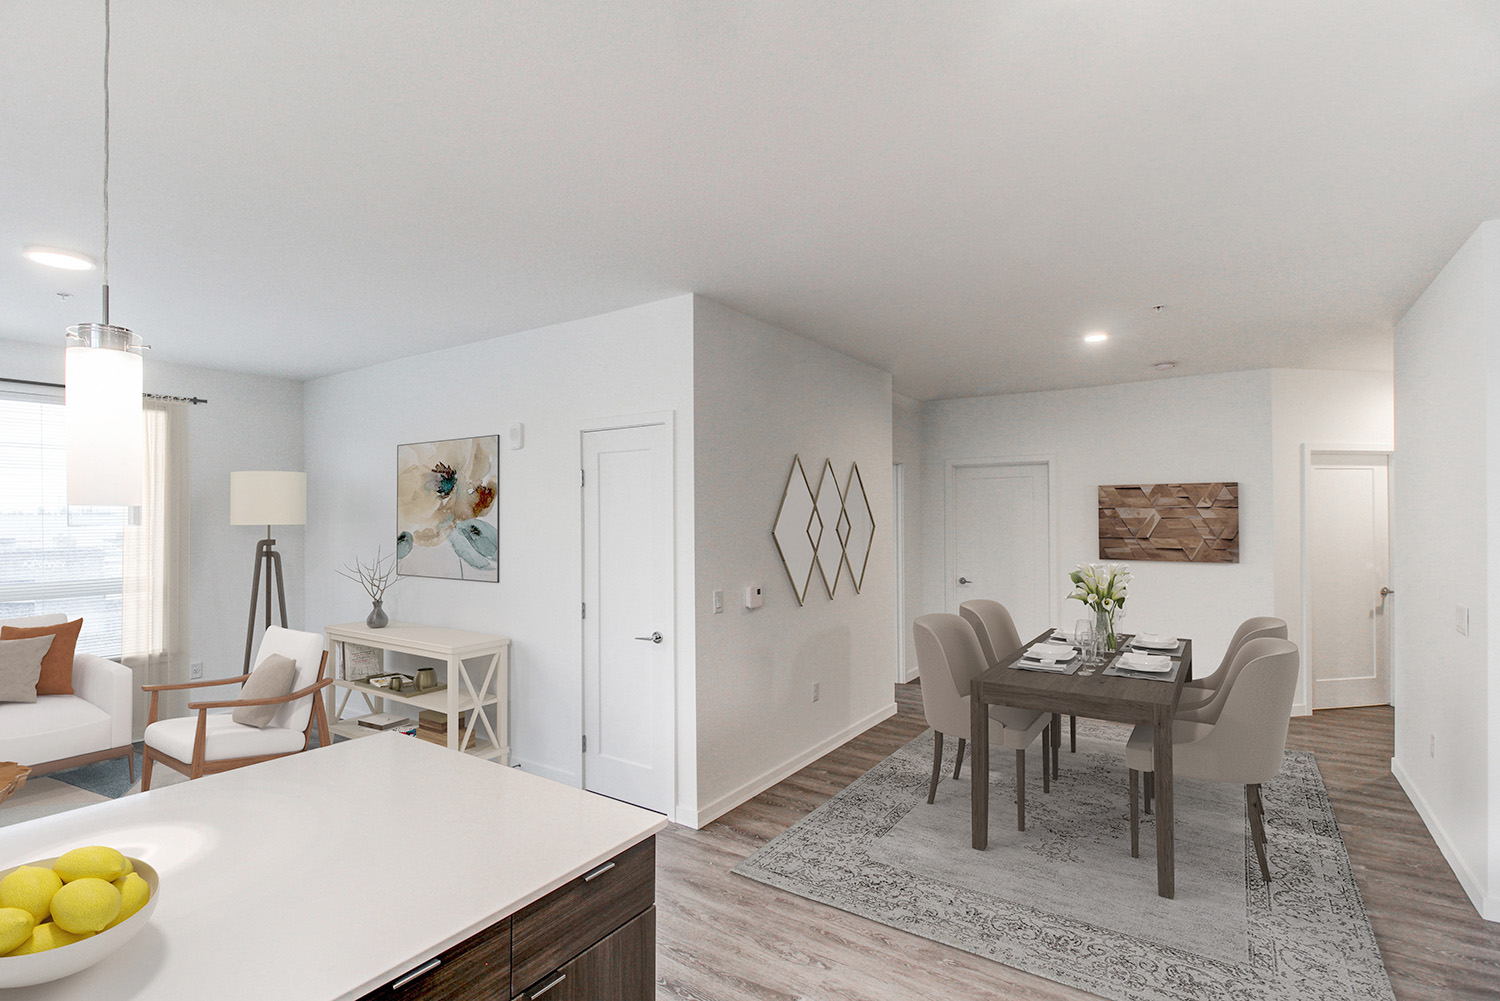 Dining room and living room area at The Woods at Alderwood in Lynnwood, WA.